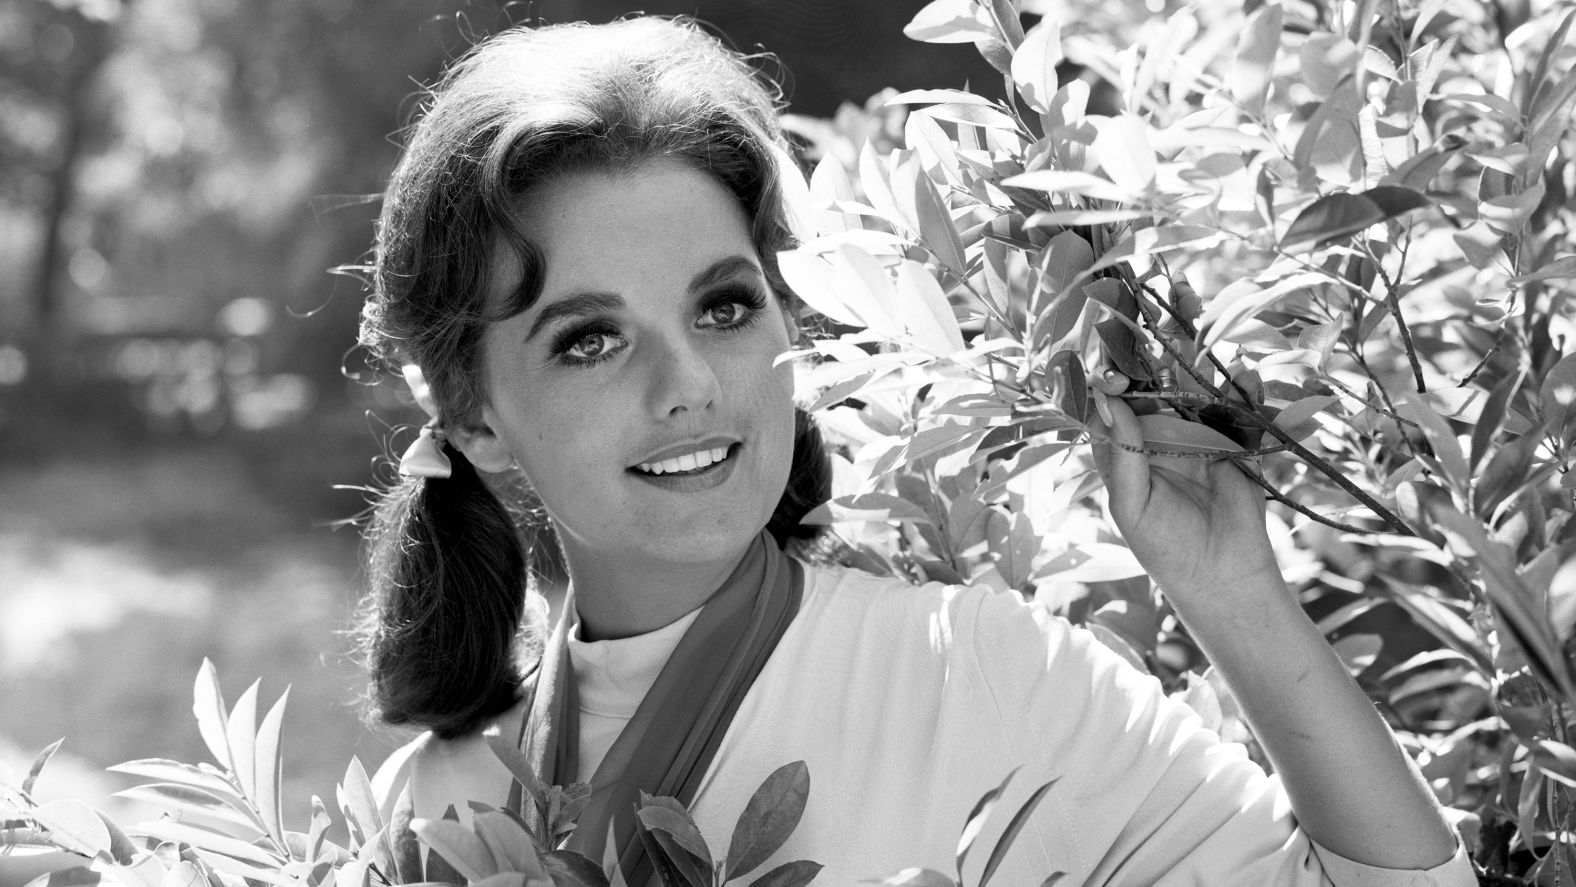 <a href="https://www.cnn.com/2020/12/30/entertainment/dawn-wells-obit/index.html" target="_blank">Dawn Wells</a>, who played the lovable castaway Mary Ann Summers on "Gilligan's Island," died from Covid-19 complications on December 30, her publicist Harlan Boll confirmed to CNN. She was 82.